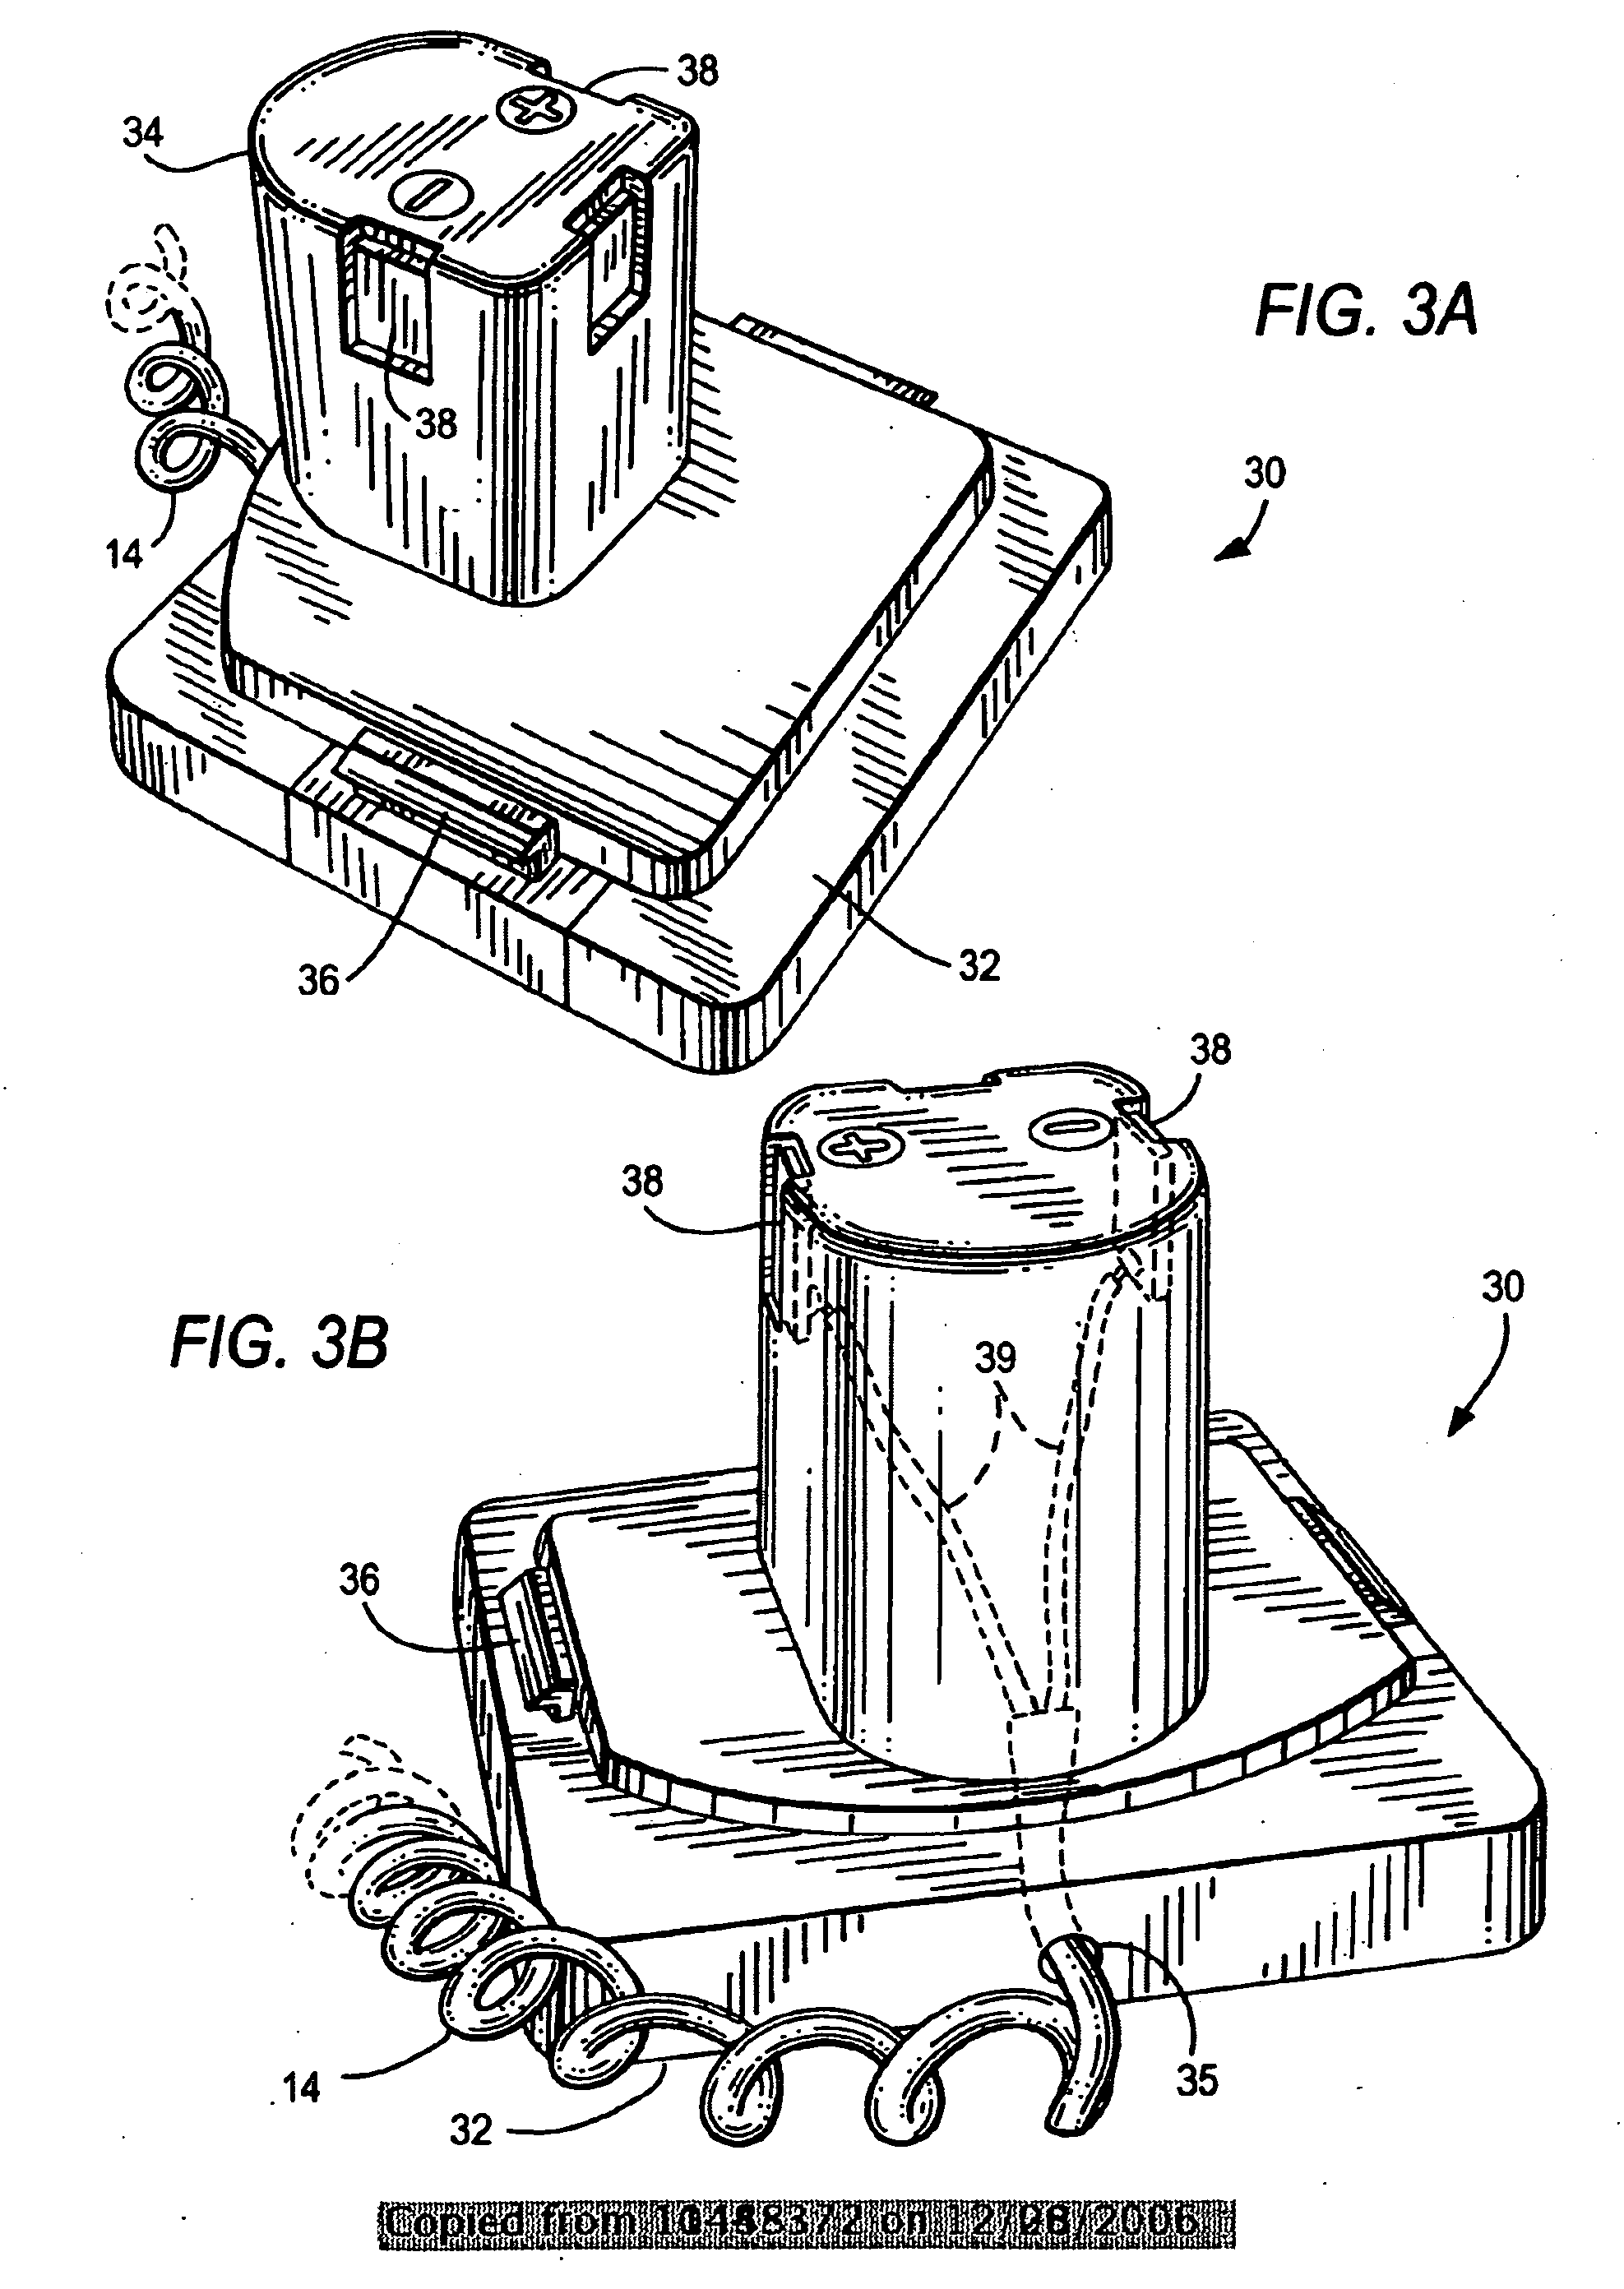 Adapter system for battery-powered tools